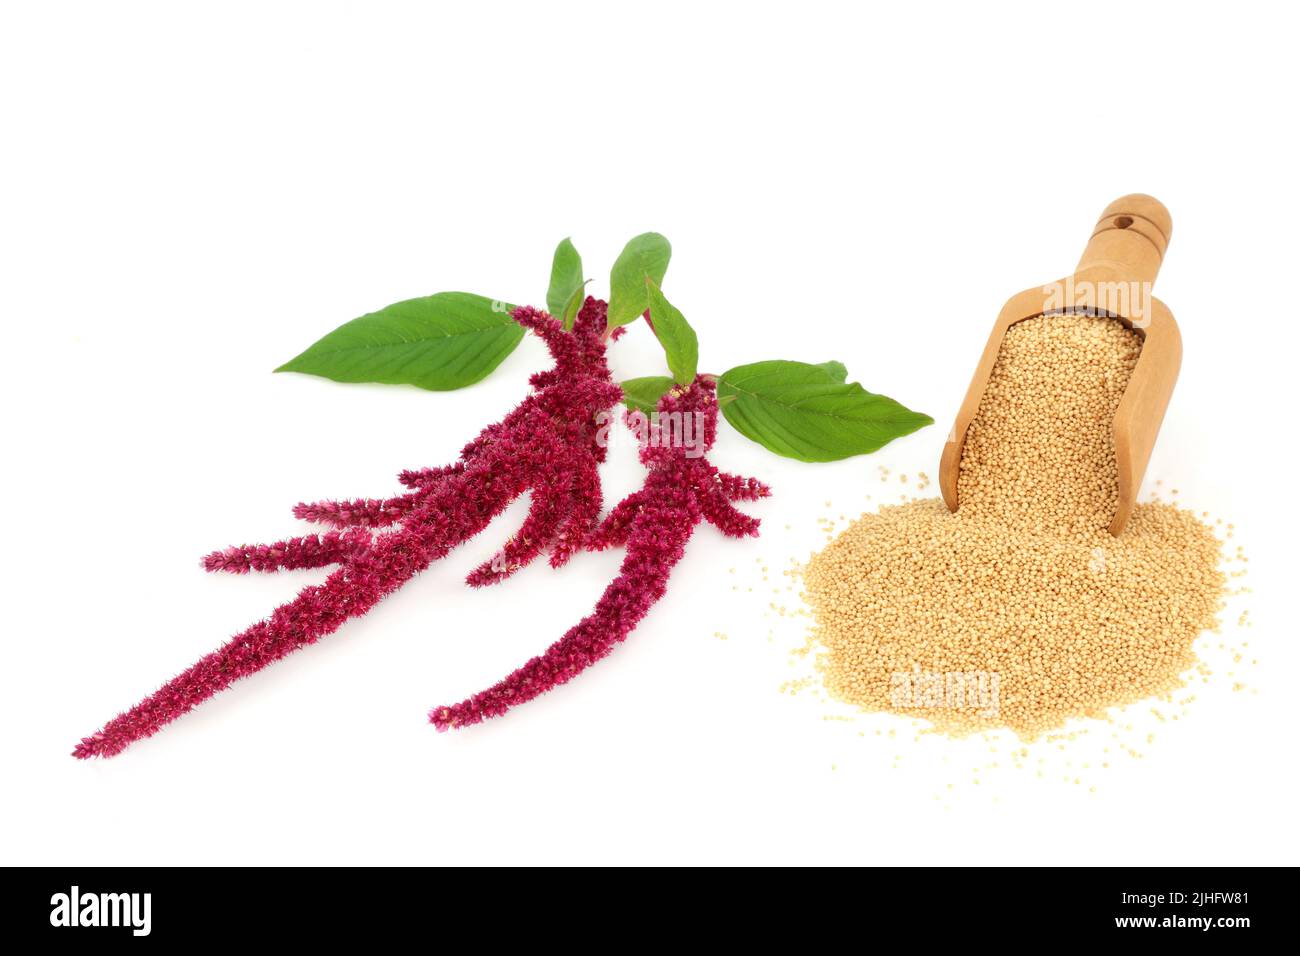 Amaranth dried grain in a scoop with amaranthus plant in flower. Nourishing health food gluten free, high in antioxidants, protein and micro nutrients Stock Photo